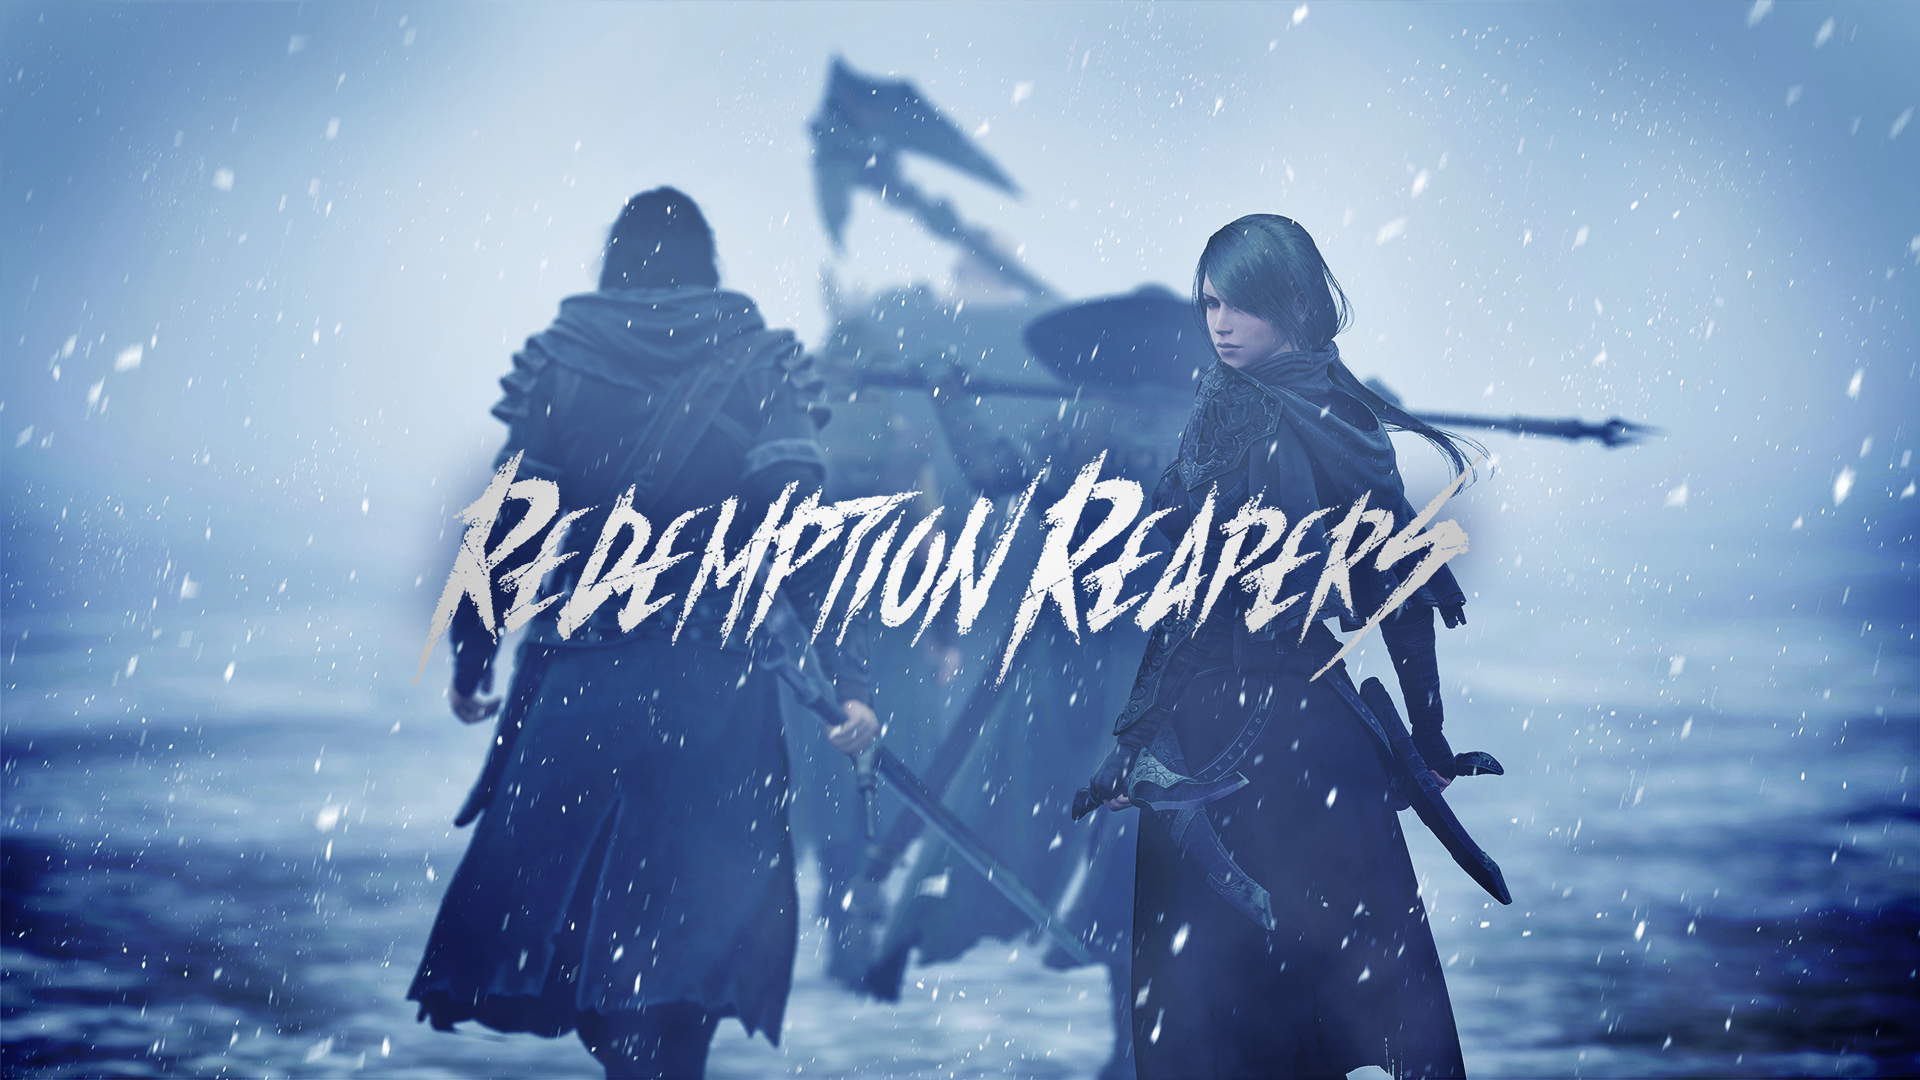 ET_KeyVisual_En ICYMI: Dark Fantasy Tactical RPG Redemption Reapers Launches Feb 22nd